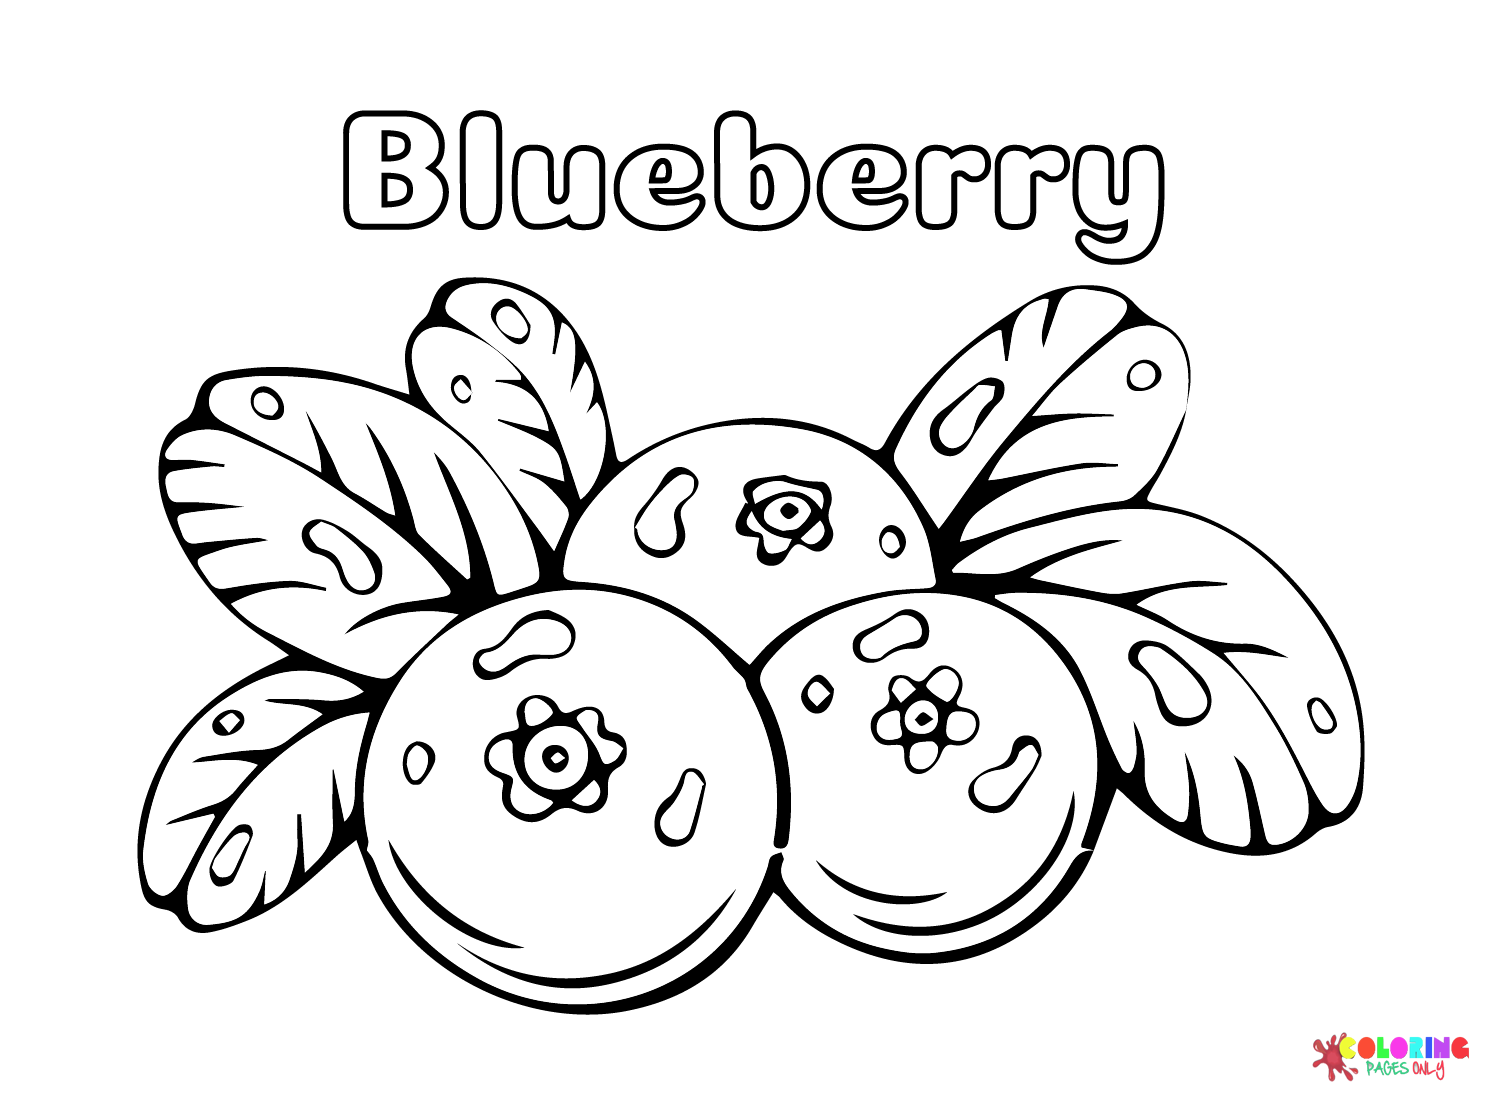 Drawing Blueberry Coloring Page